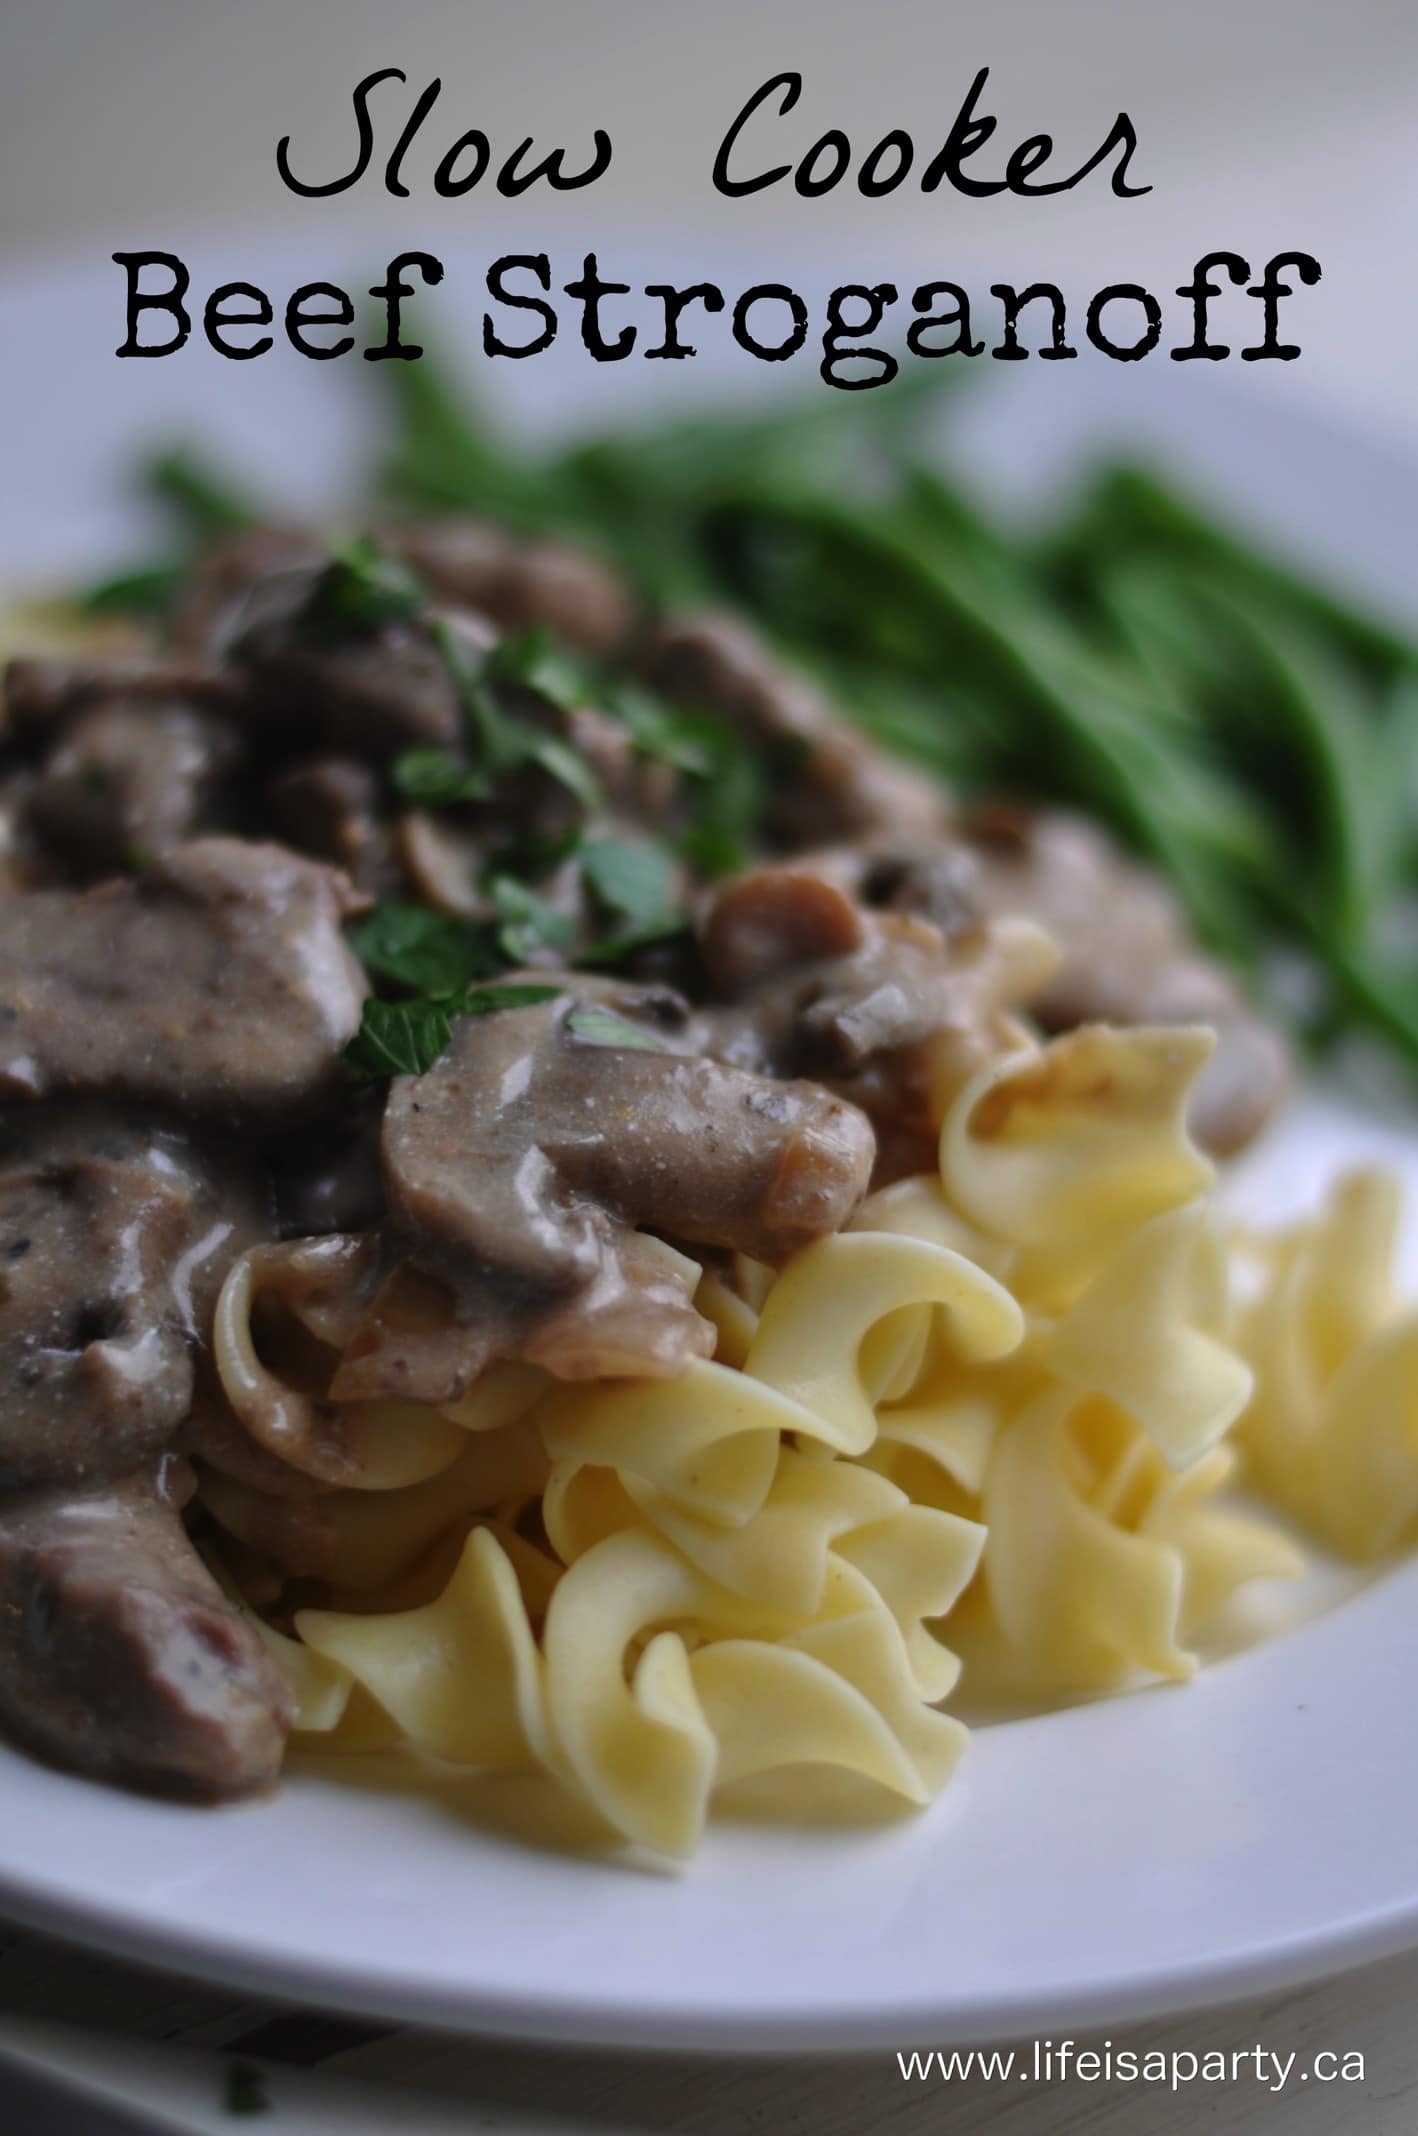 Slow Cooker Beef Stroganoff -easy, perfect for a busy weeknight, made with all fresh ingredients (no canned soups), and delicious. Highly recommend.